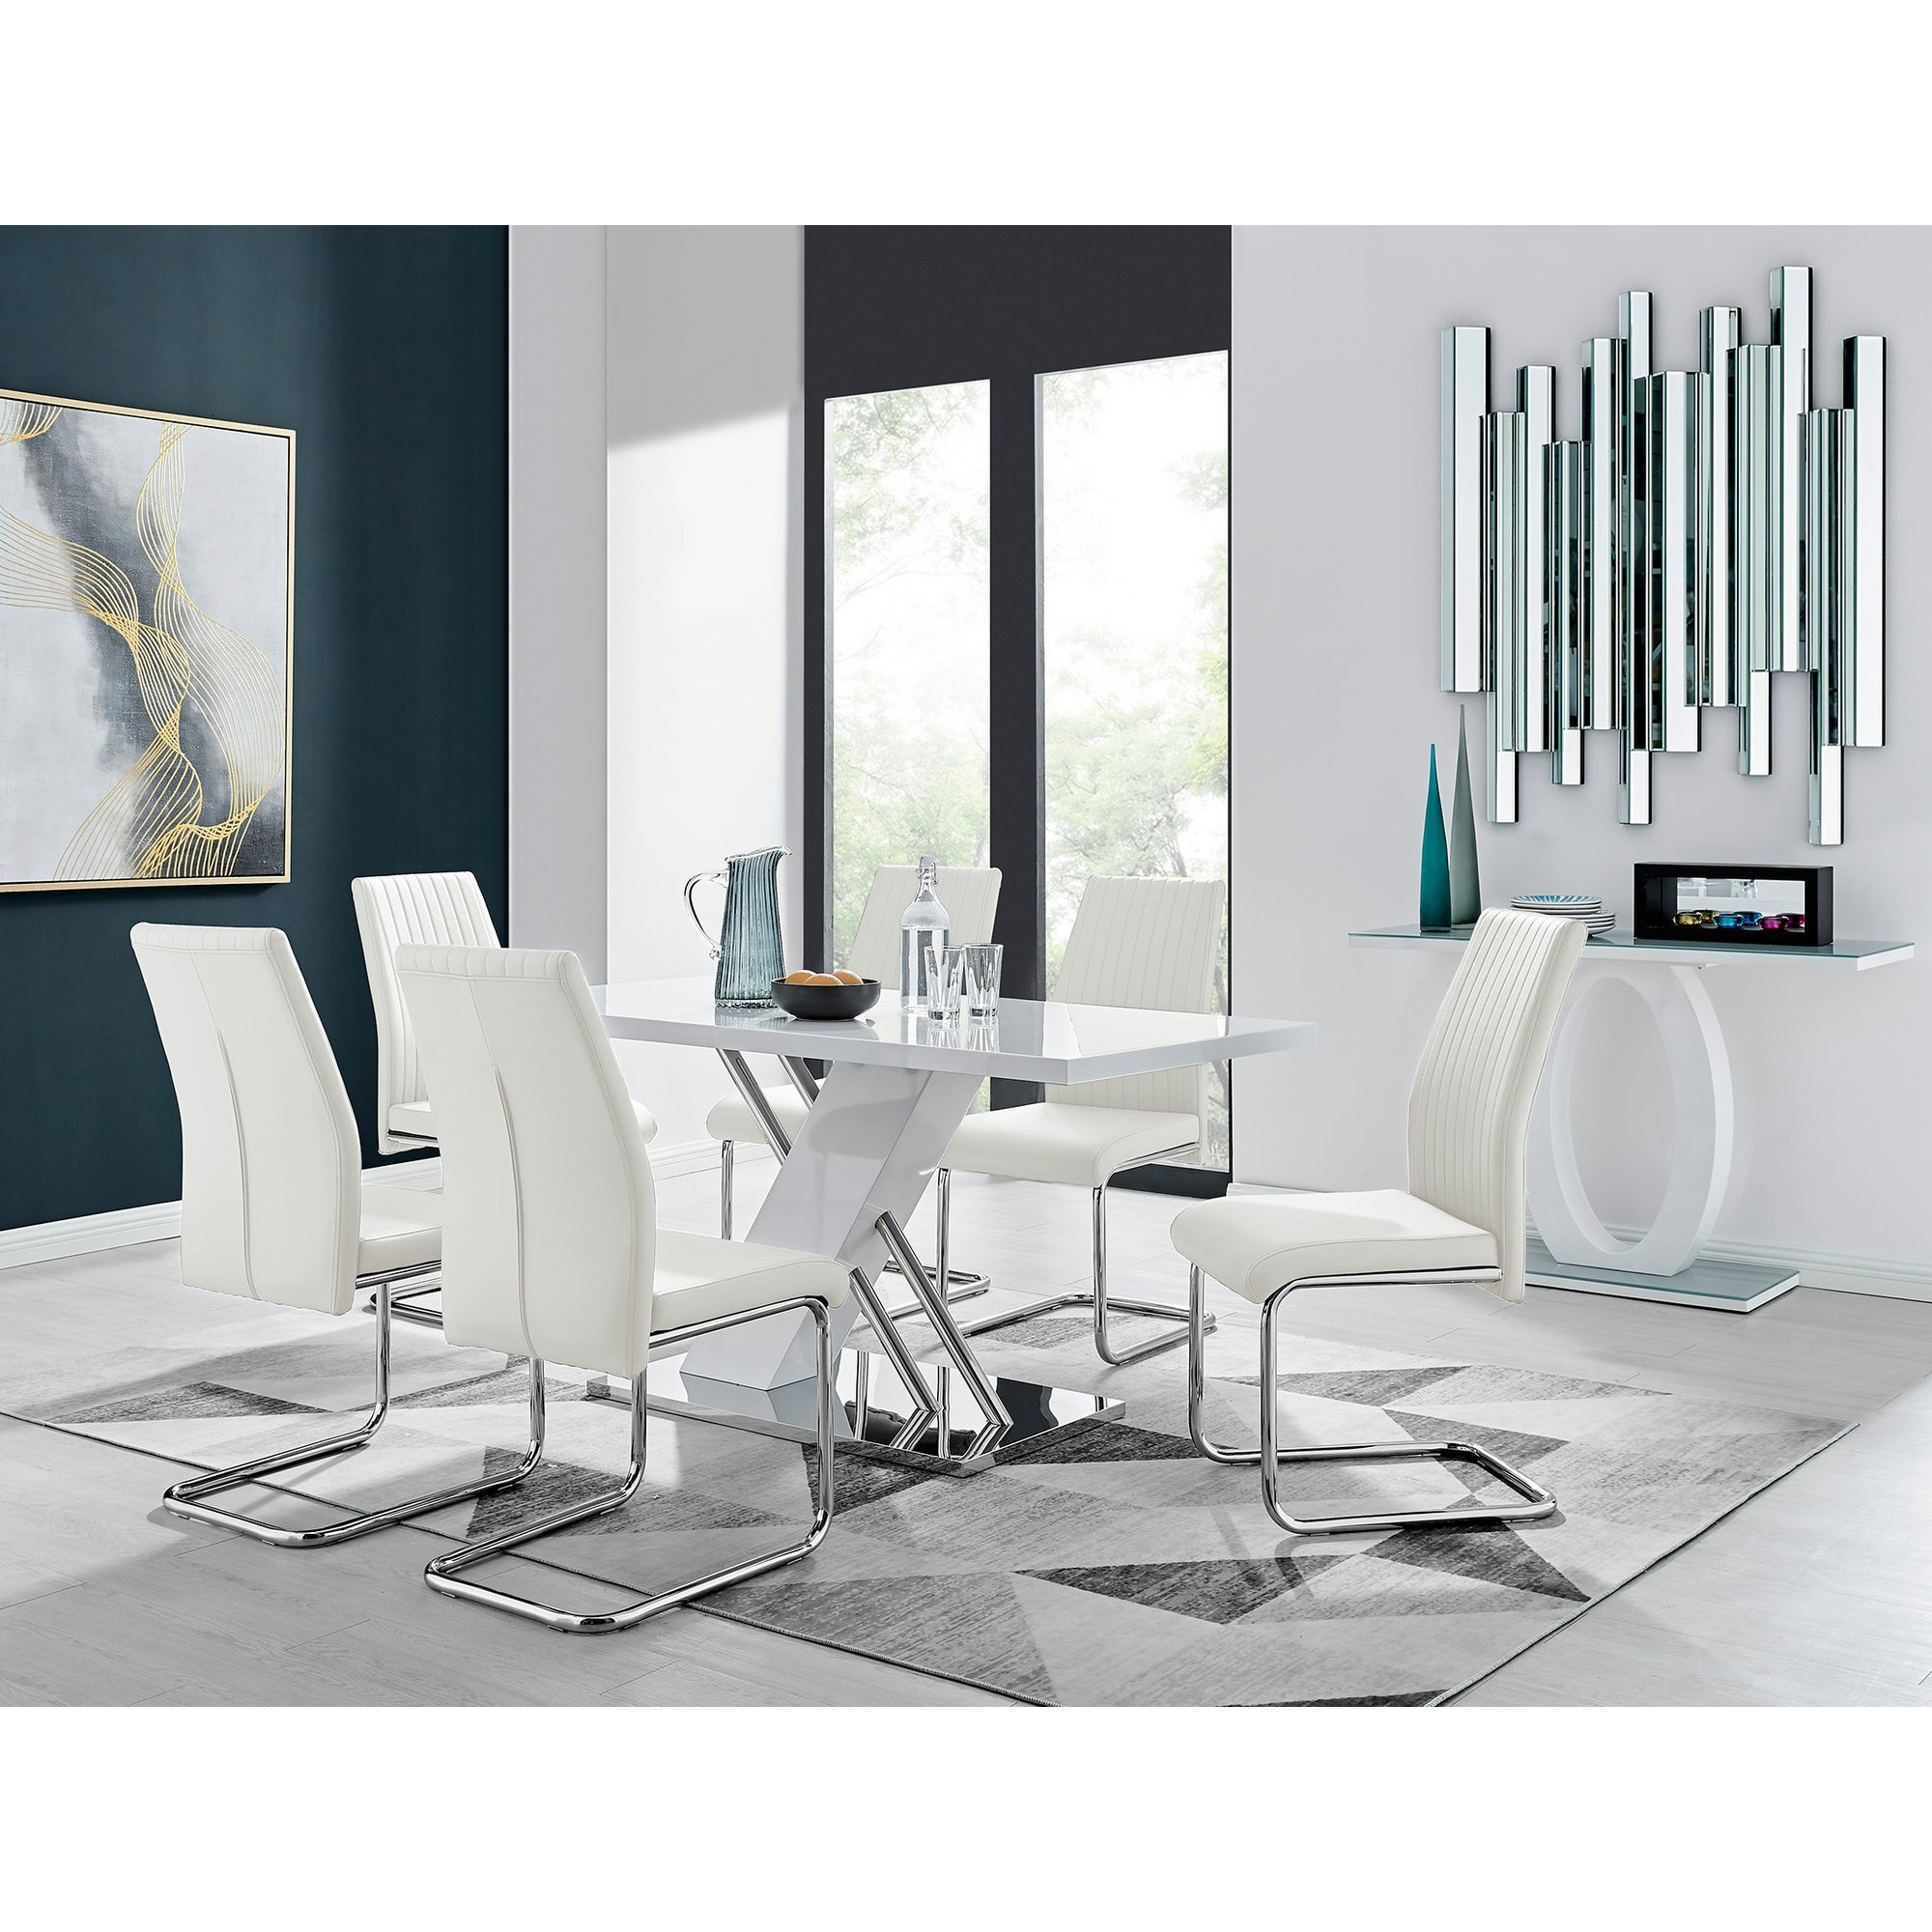 Sorrento White High Gloss And Chrome Dining Table And 6 Lorenzo Dining Chairs